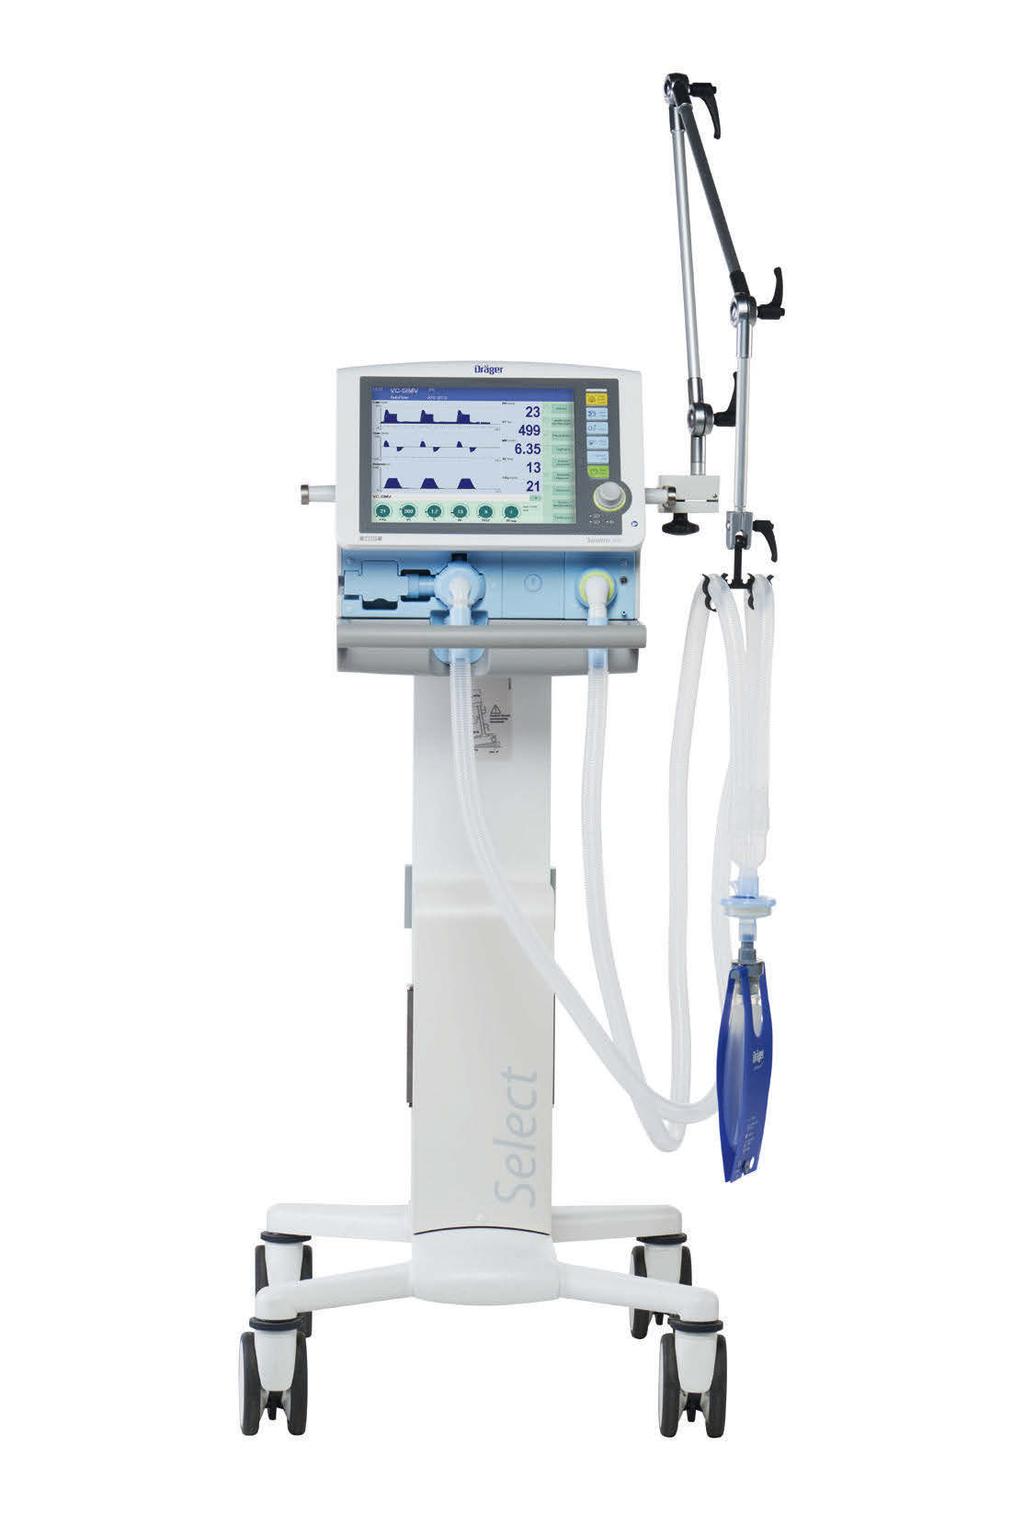 Dräger Savina 300 Select ICU Ventilation and Respiratory Monitoring The Dräger Savina 300 Select (in this configuration) combines the independence and power of a turbine-driven ventilation system